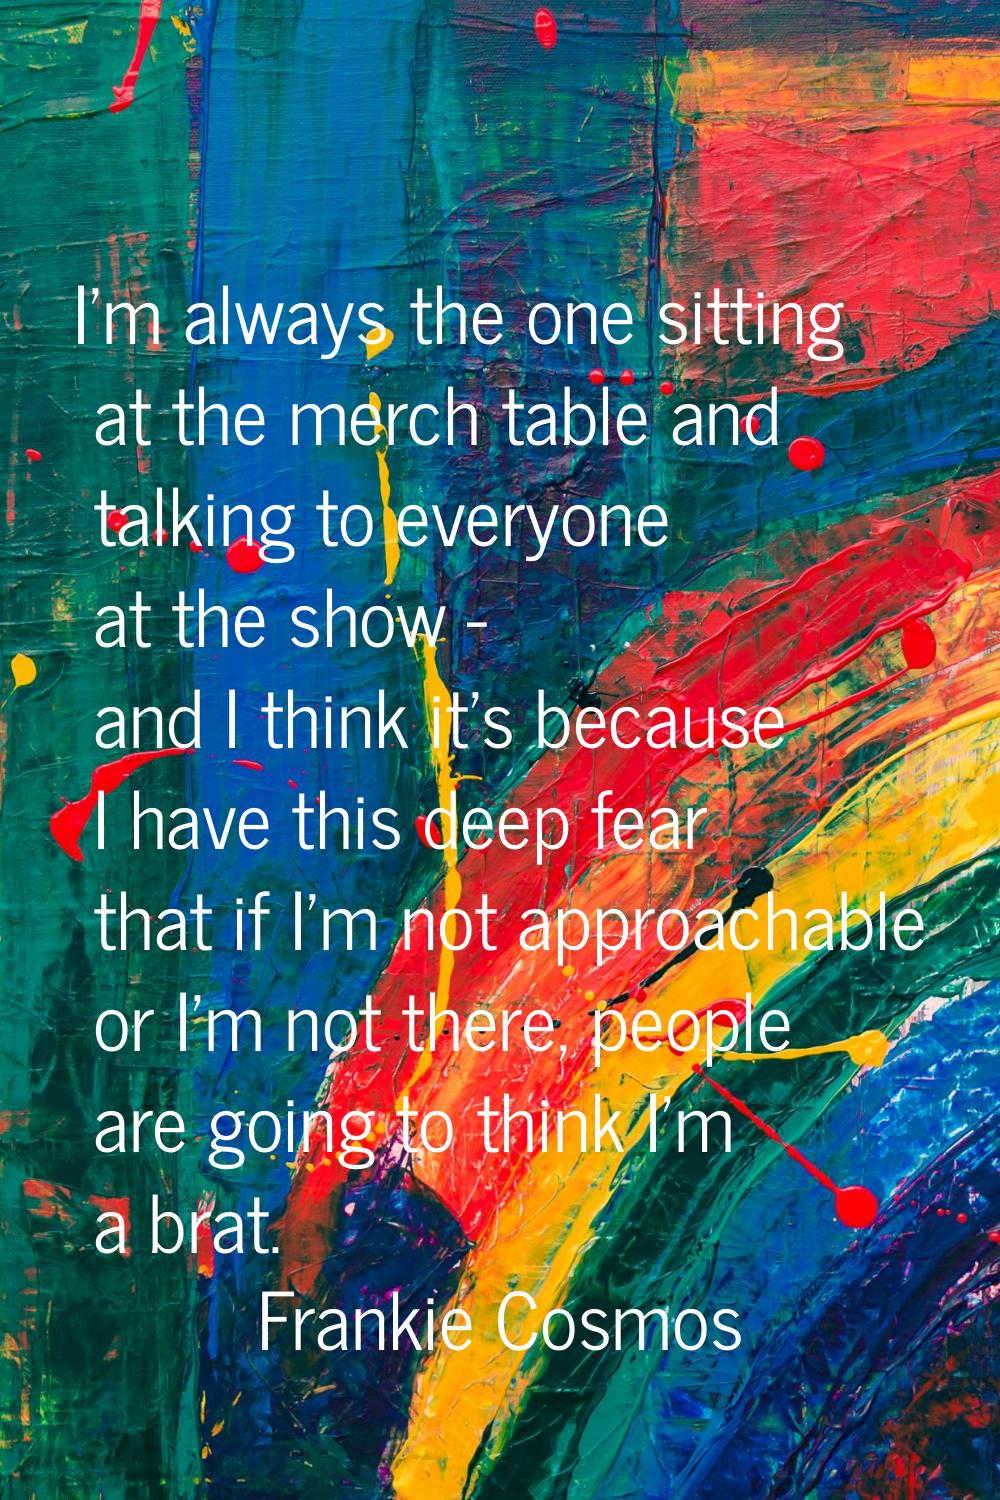 I'm always the one sitting at the merch table and talking to everyone at the show - and I think it'